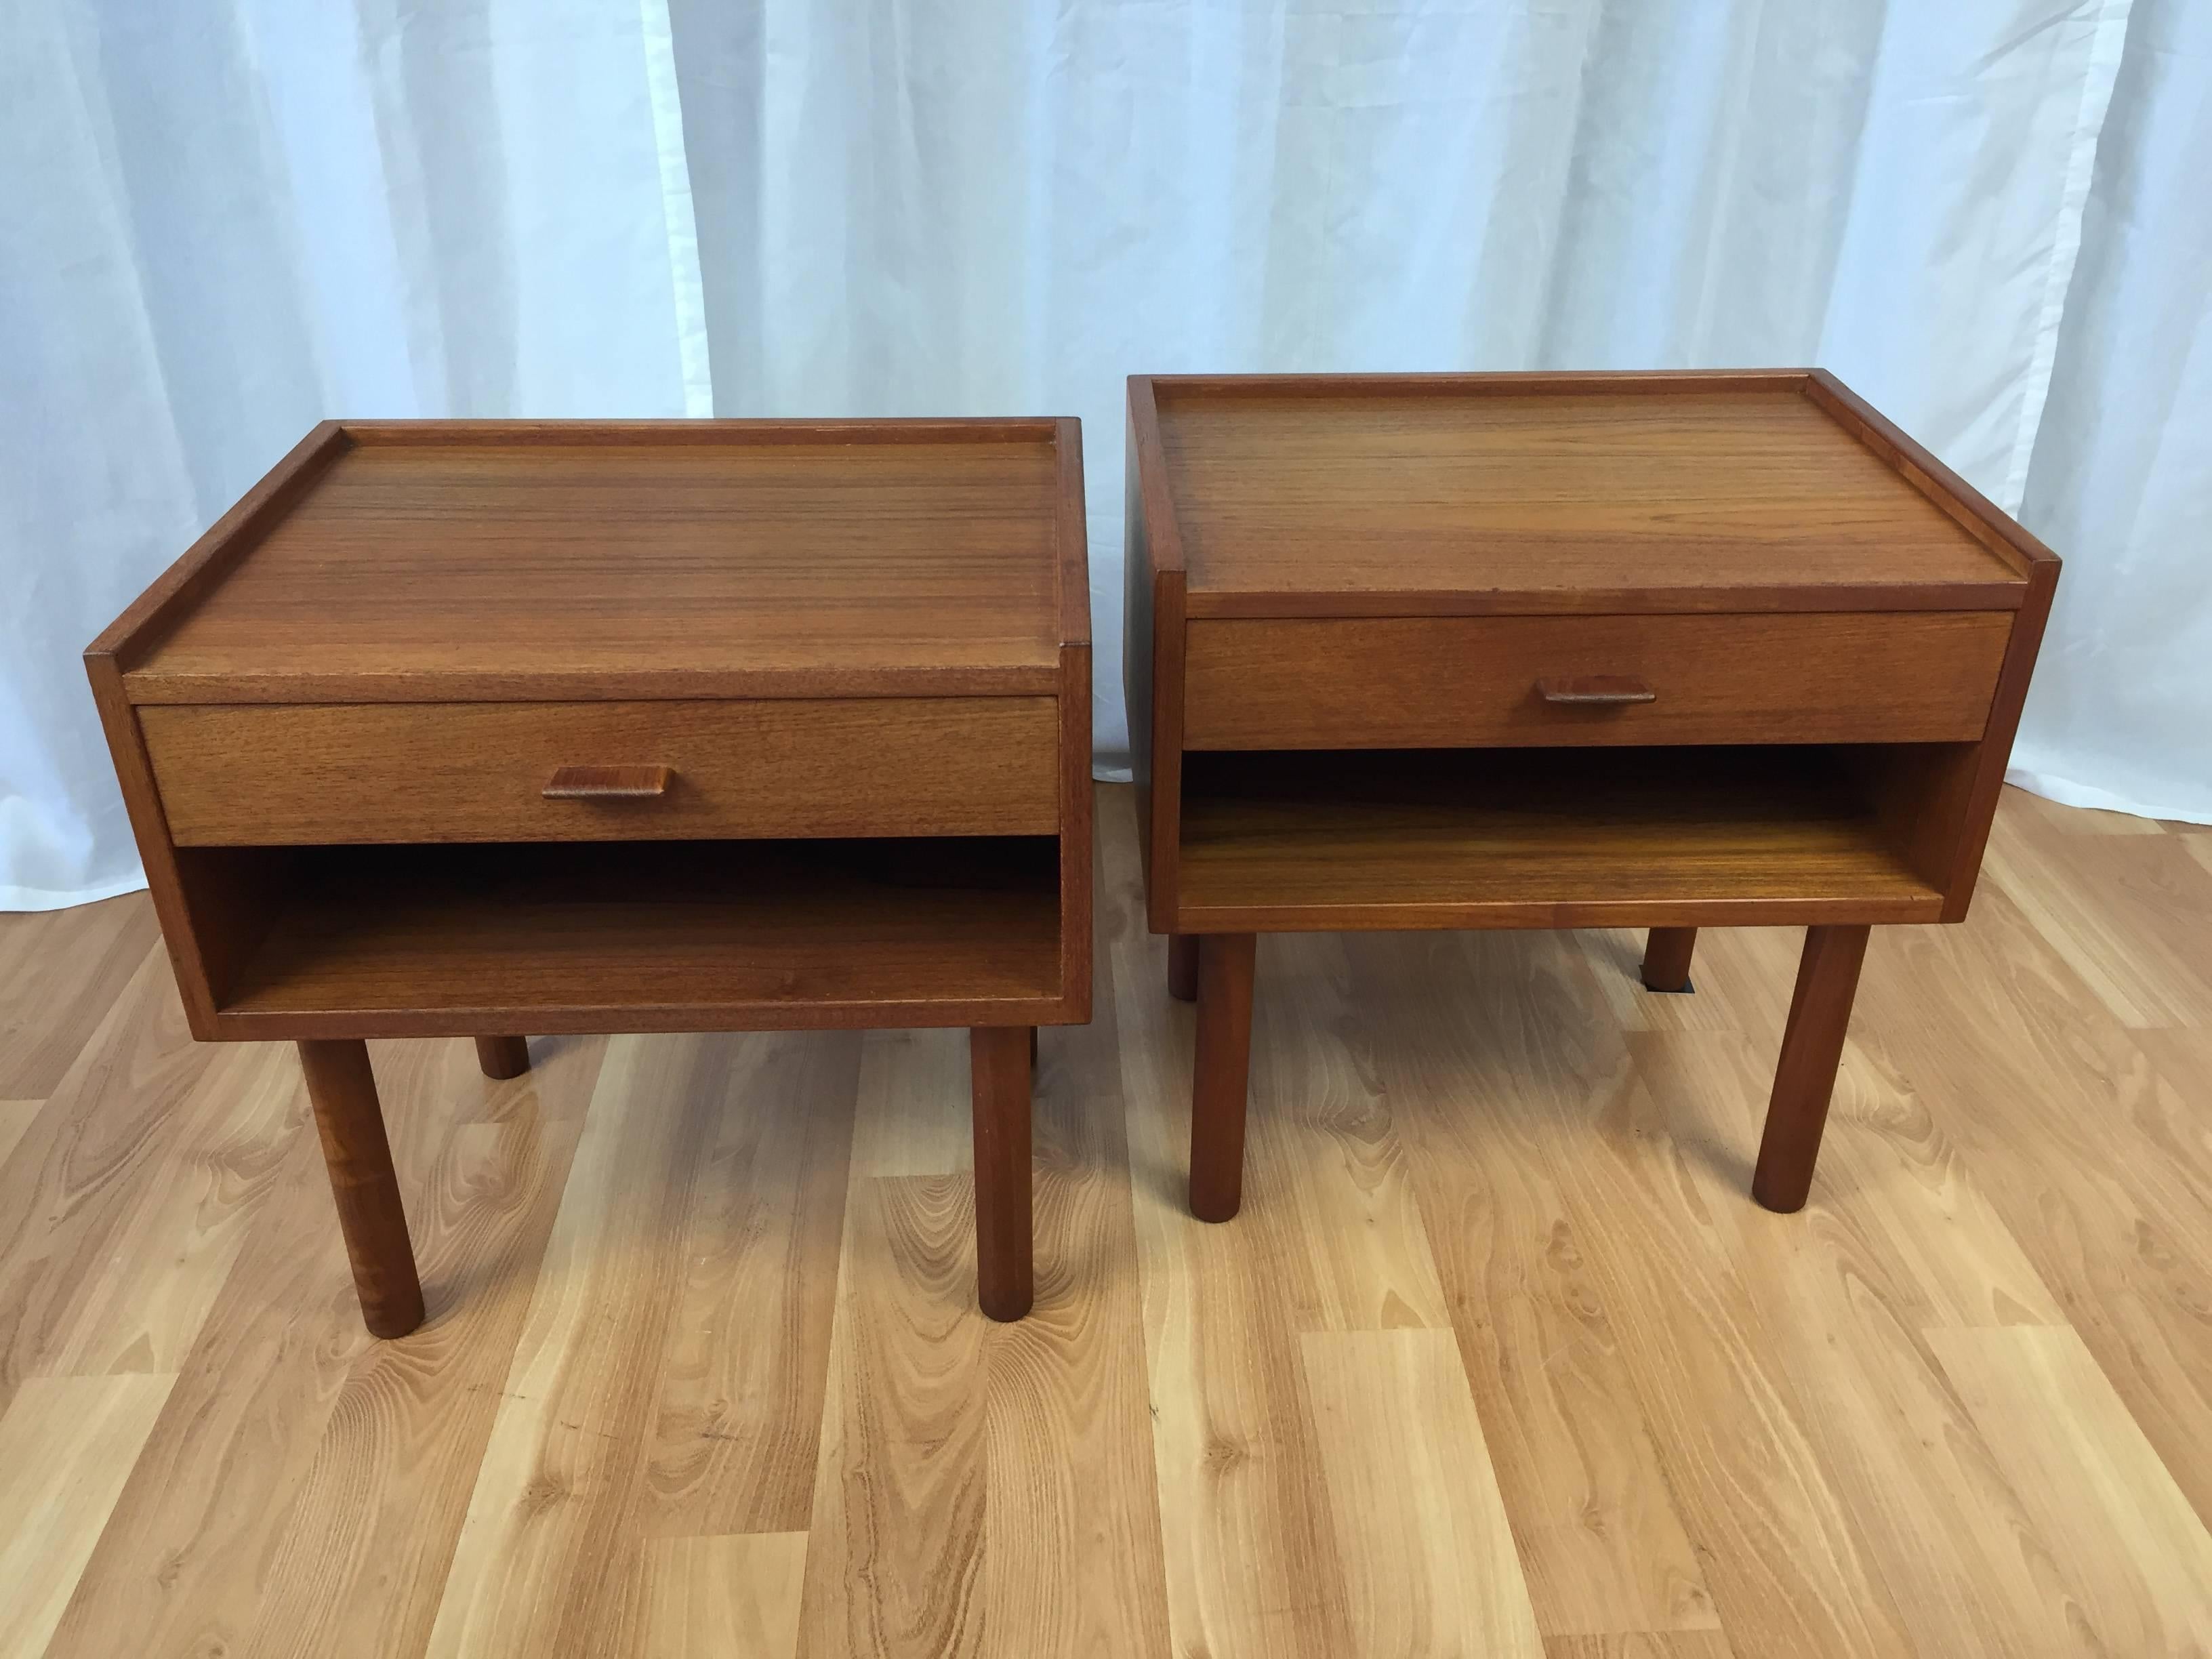 A rare pair of Danish modern teak nightstands (Model RY430) designed by Hans Wegner for Ry Møbler.

Their diminutive scale makes them a perfect fit for smaller spaces, while their strong, clean lines leave a large and lasting impression. Each